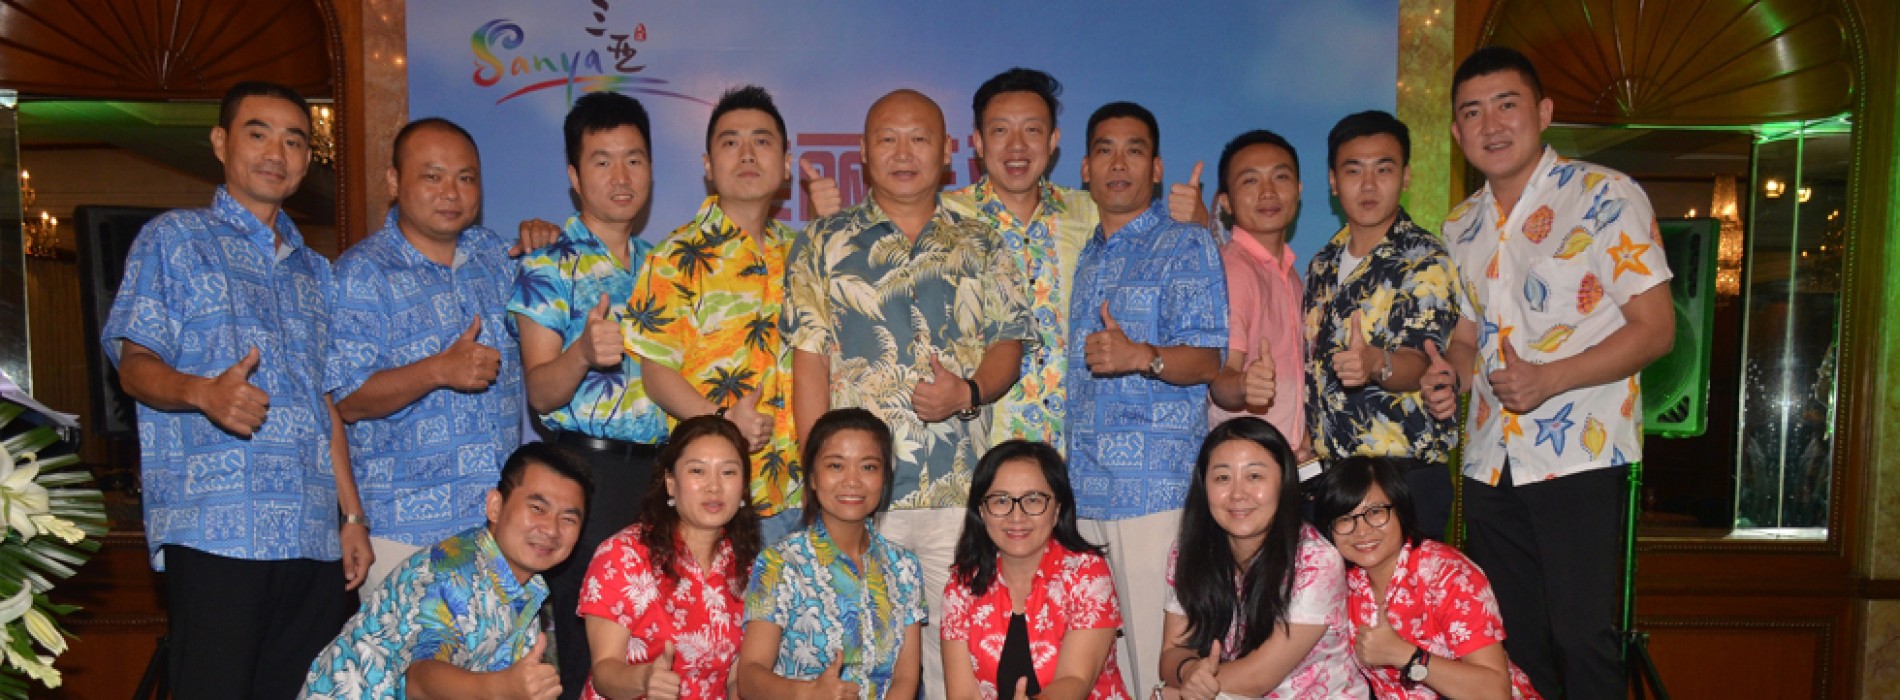 Sanya Tourism promotional and marketing event